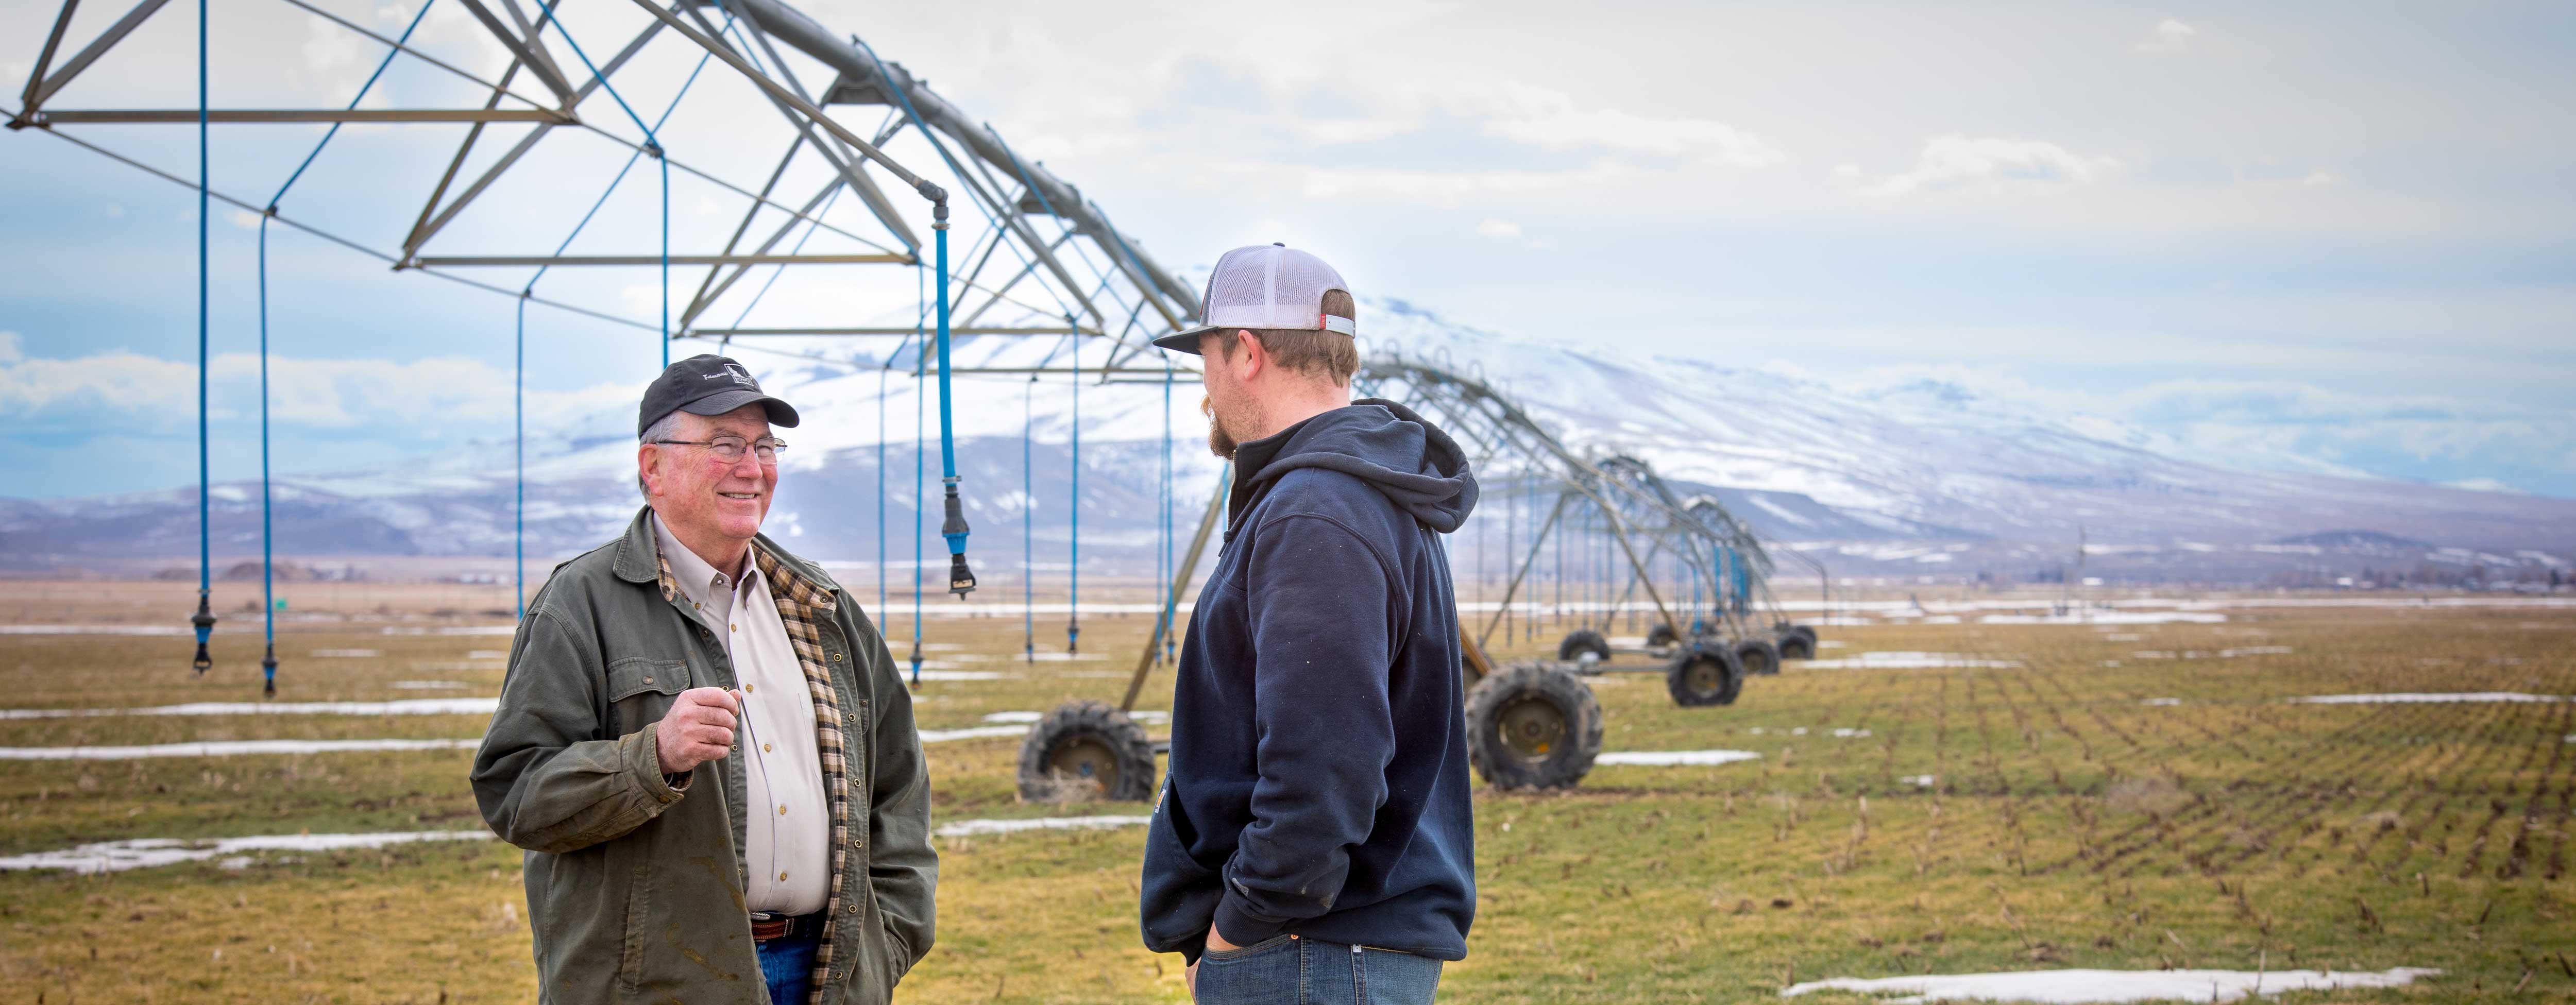 Scott Bedke speaking with person in front of a pivot irrigation in a field